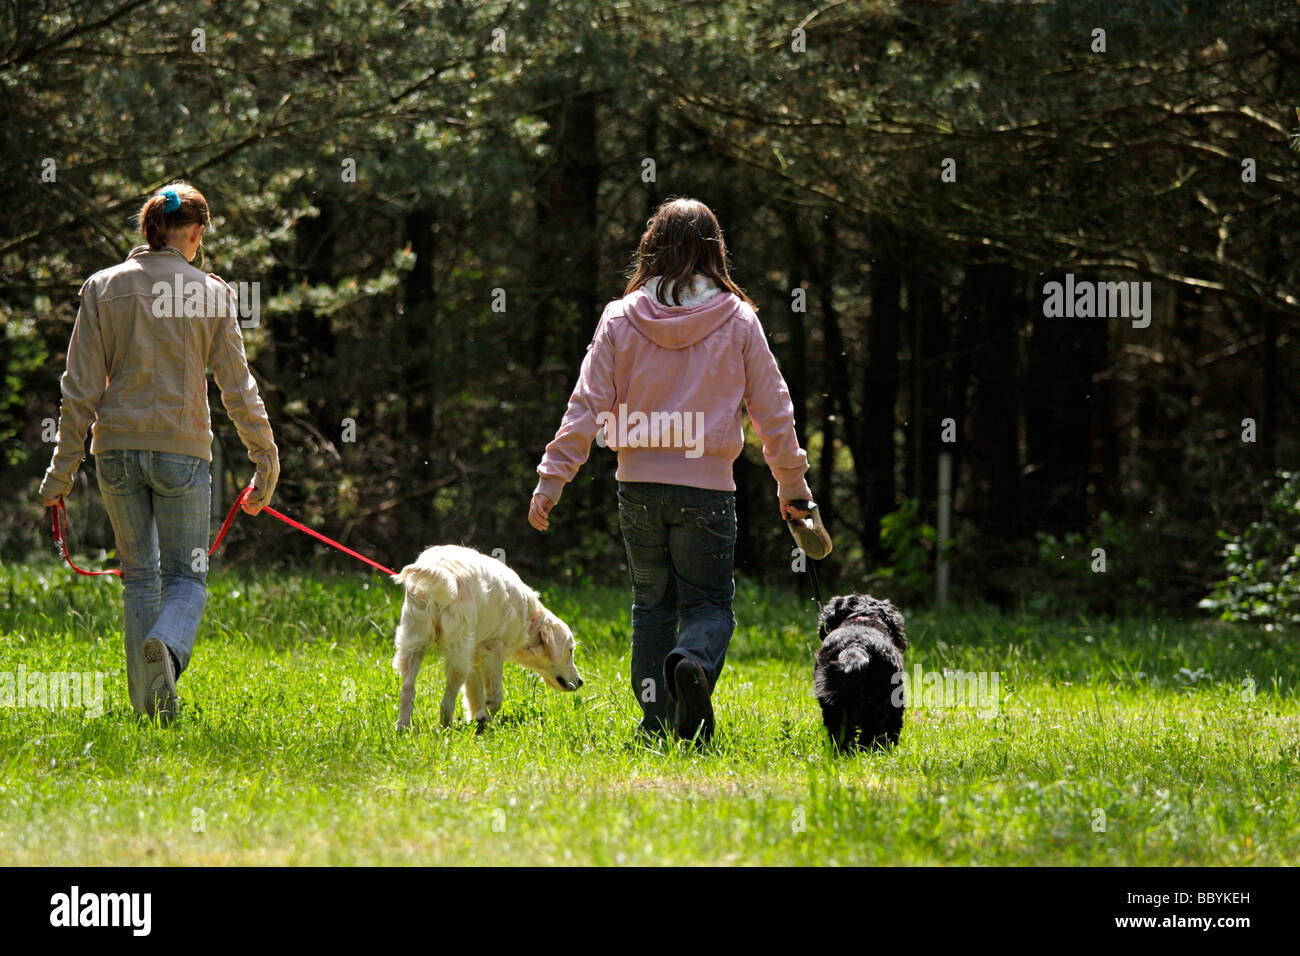 two young girls walking their dogs Stock Photo